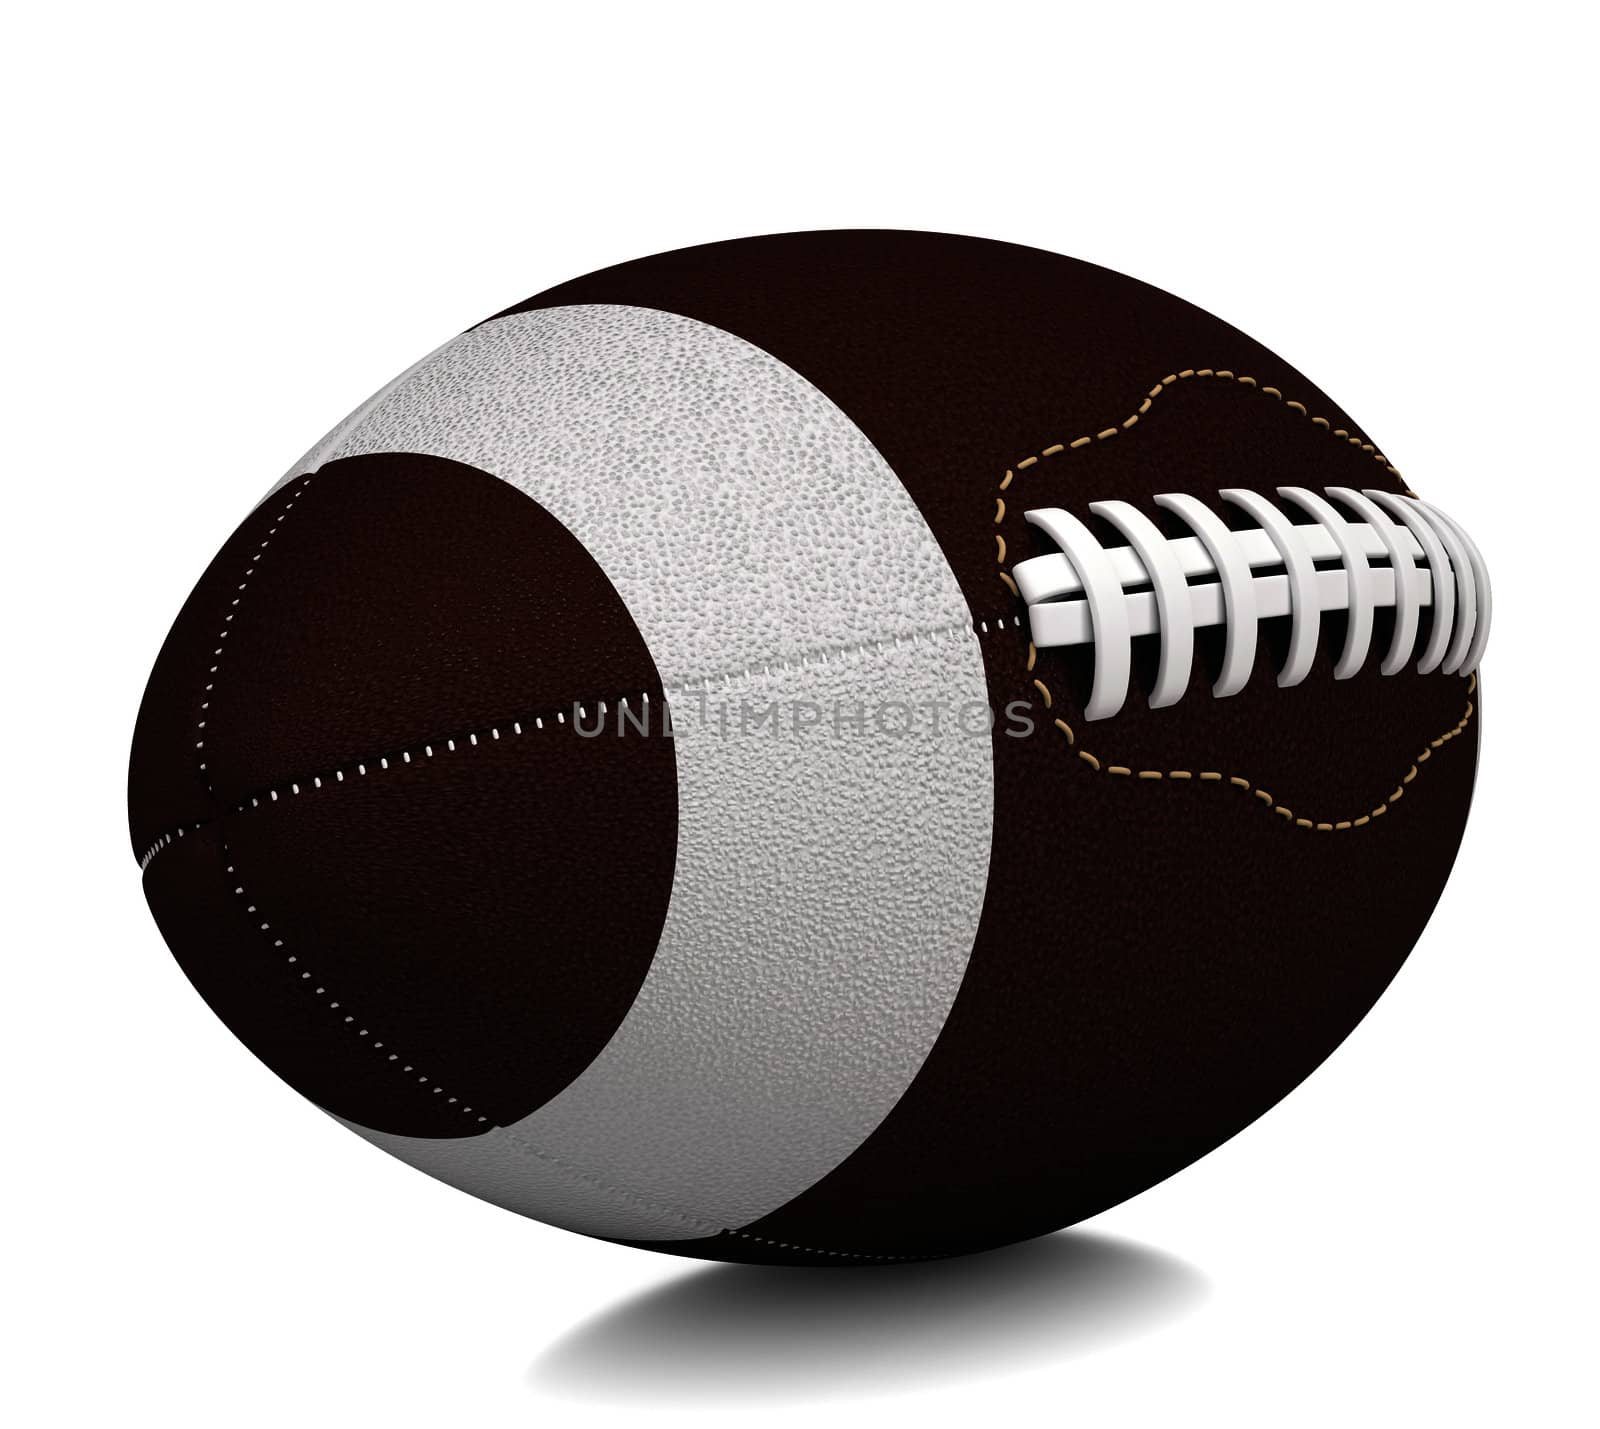 Ball for American football by cherezoff